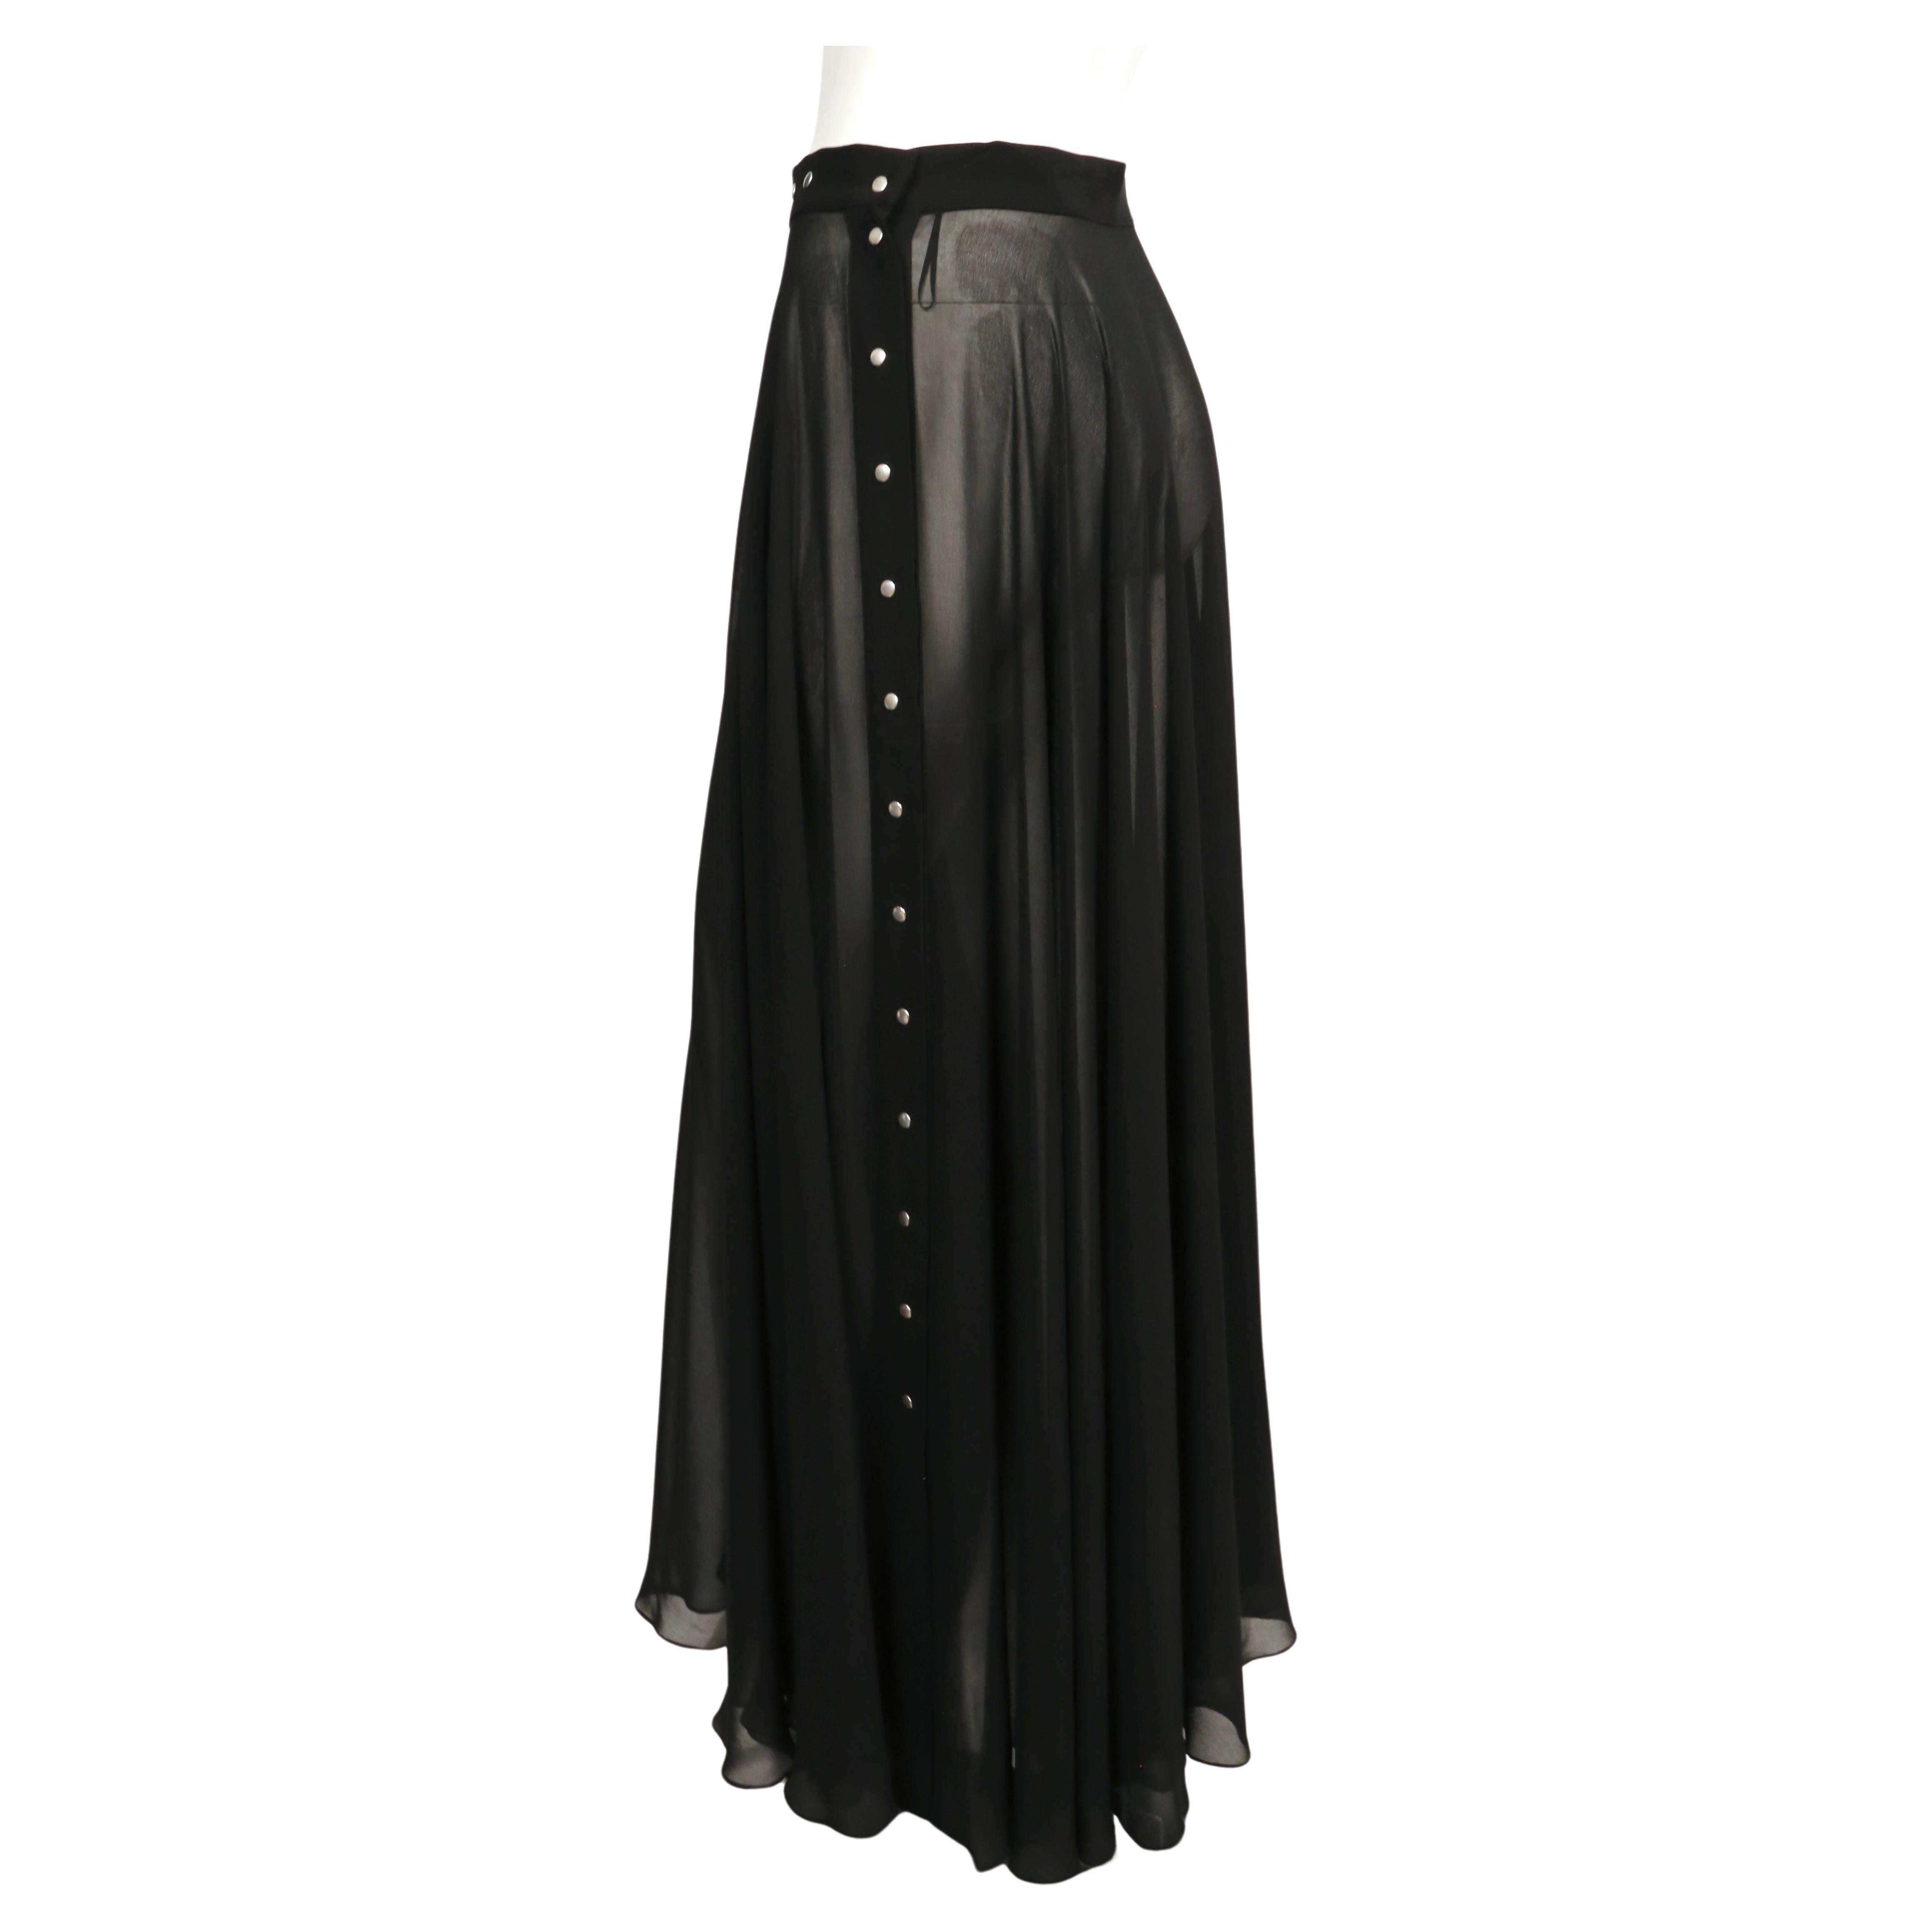 2000's JEAN PAUL GAULTIER black sheer maxi skirt In Good Condition For Sale In San Fransisco, CA